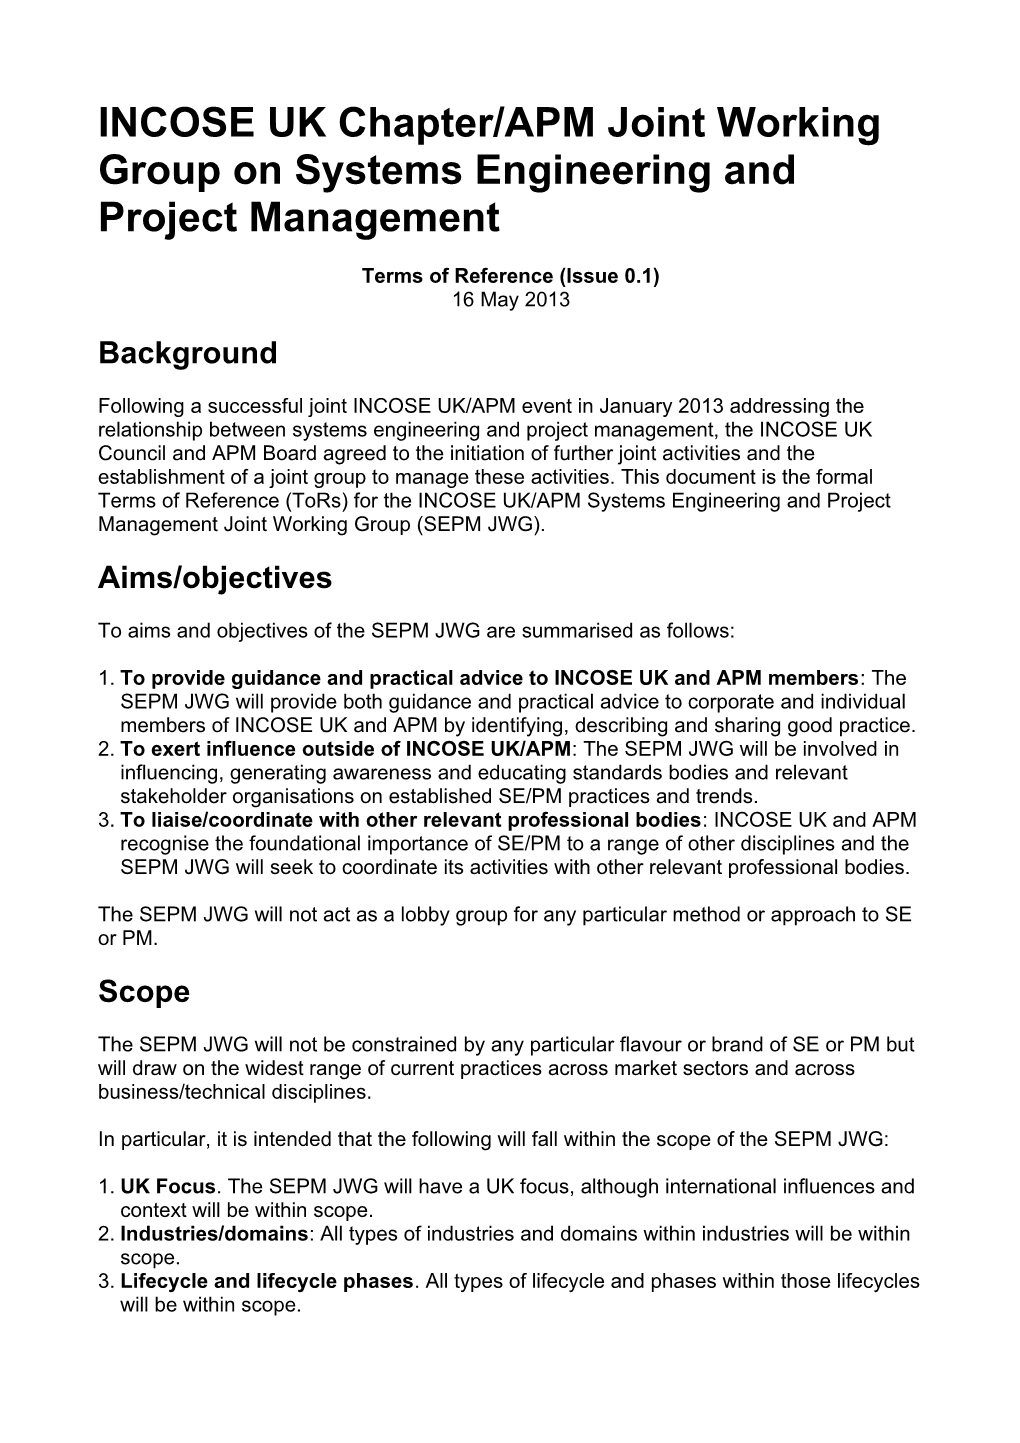 INCOSE UK Chapter/APM Joint Working Group on Systems Engineering and Project Management